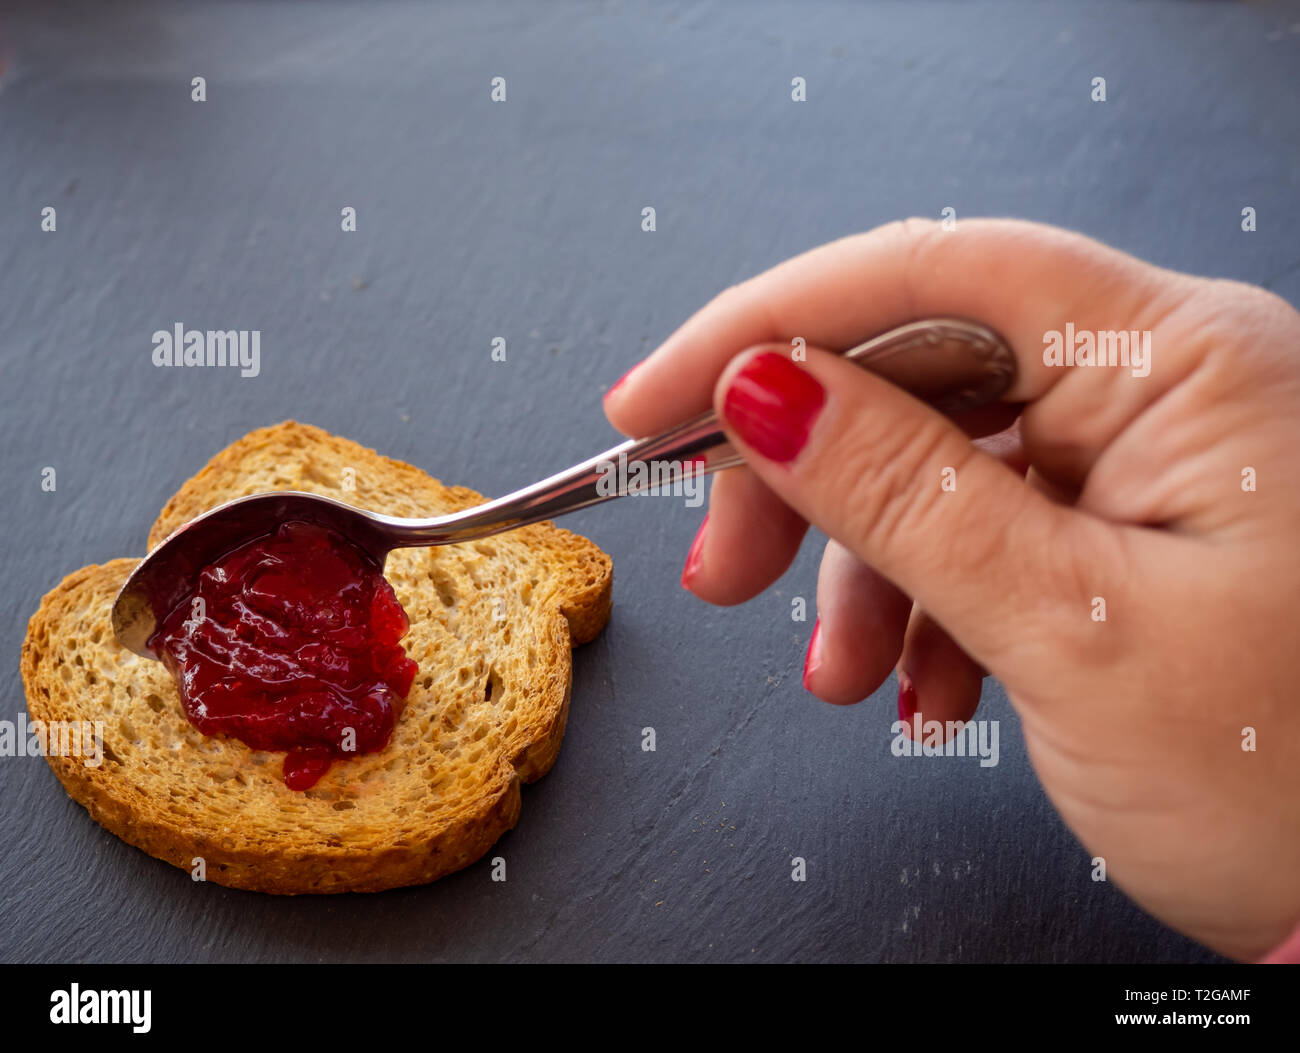 A woman with painted nails smearing red raspberry jam with a spoon on a slice of toast Stock Photo